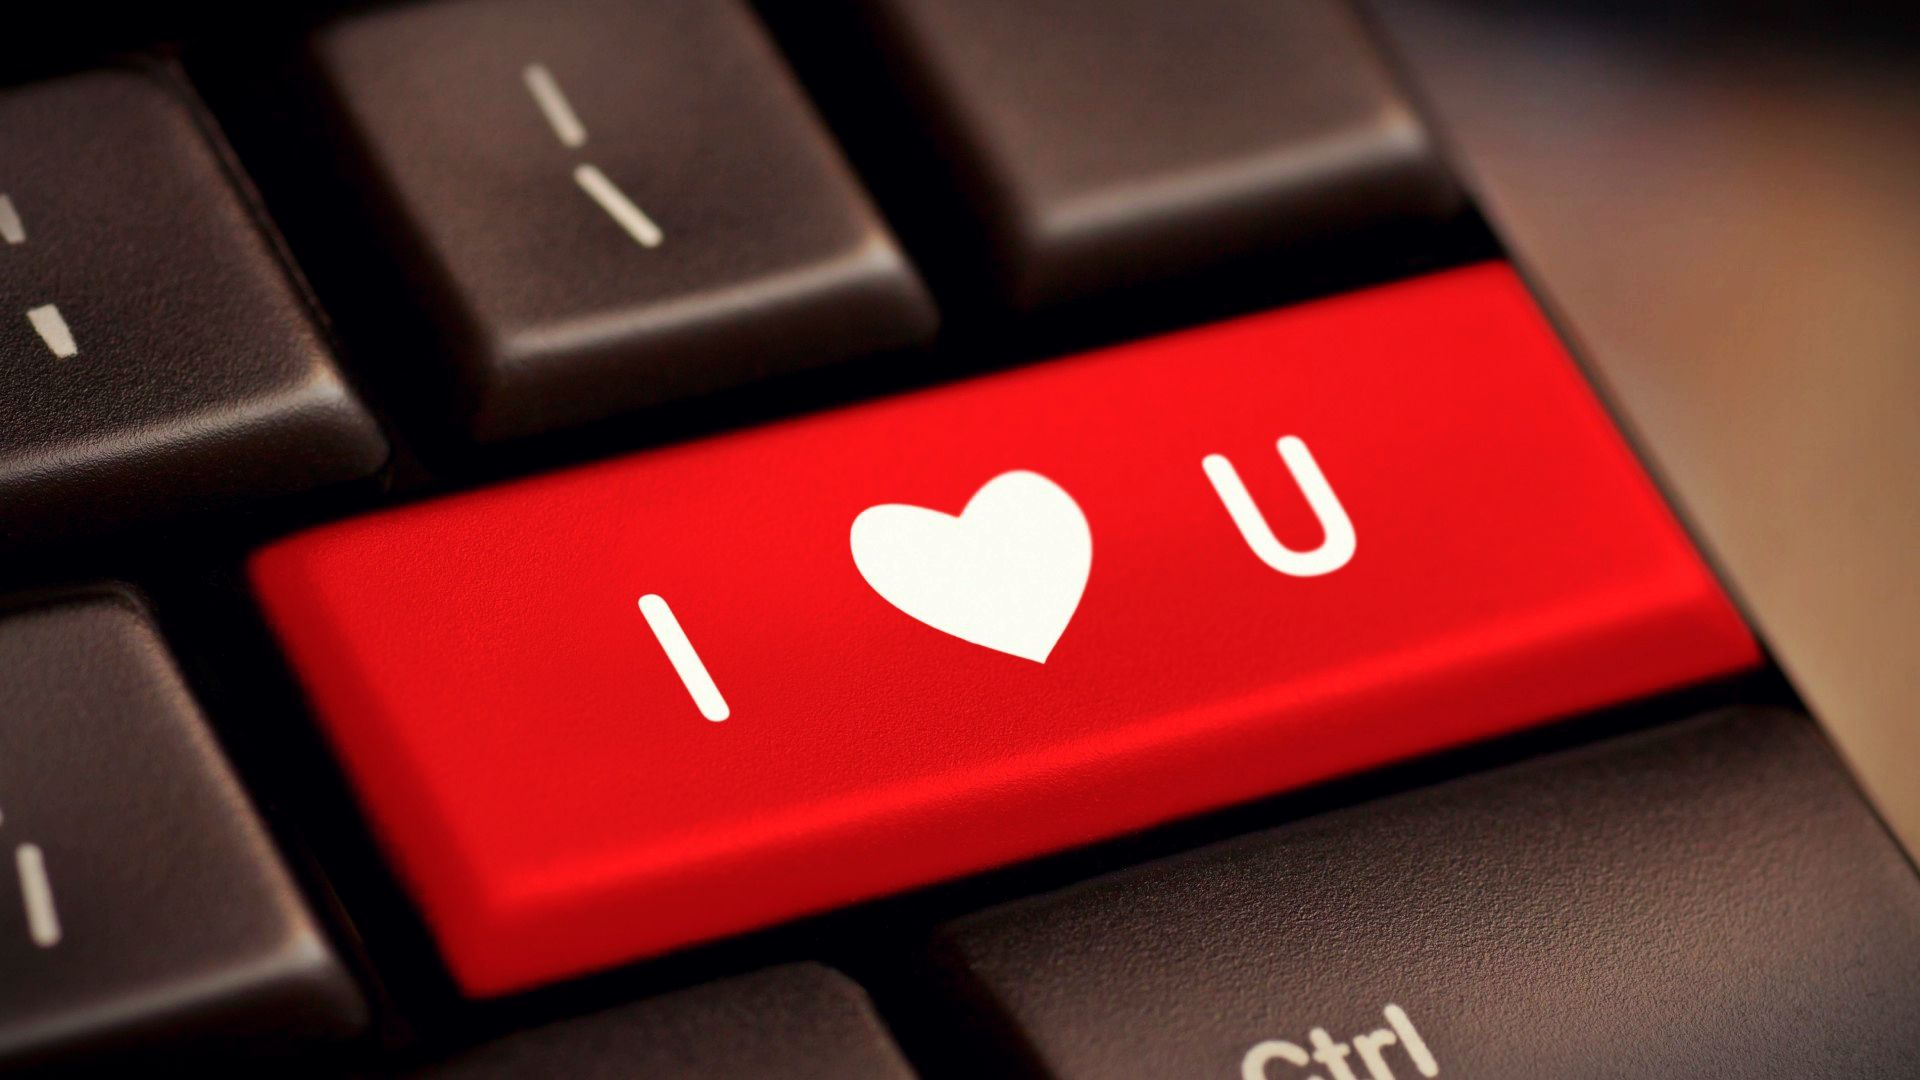 I love you - button on keyboard